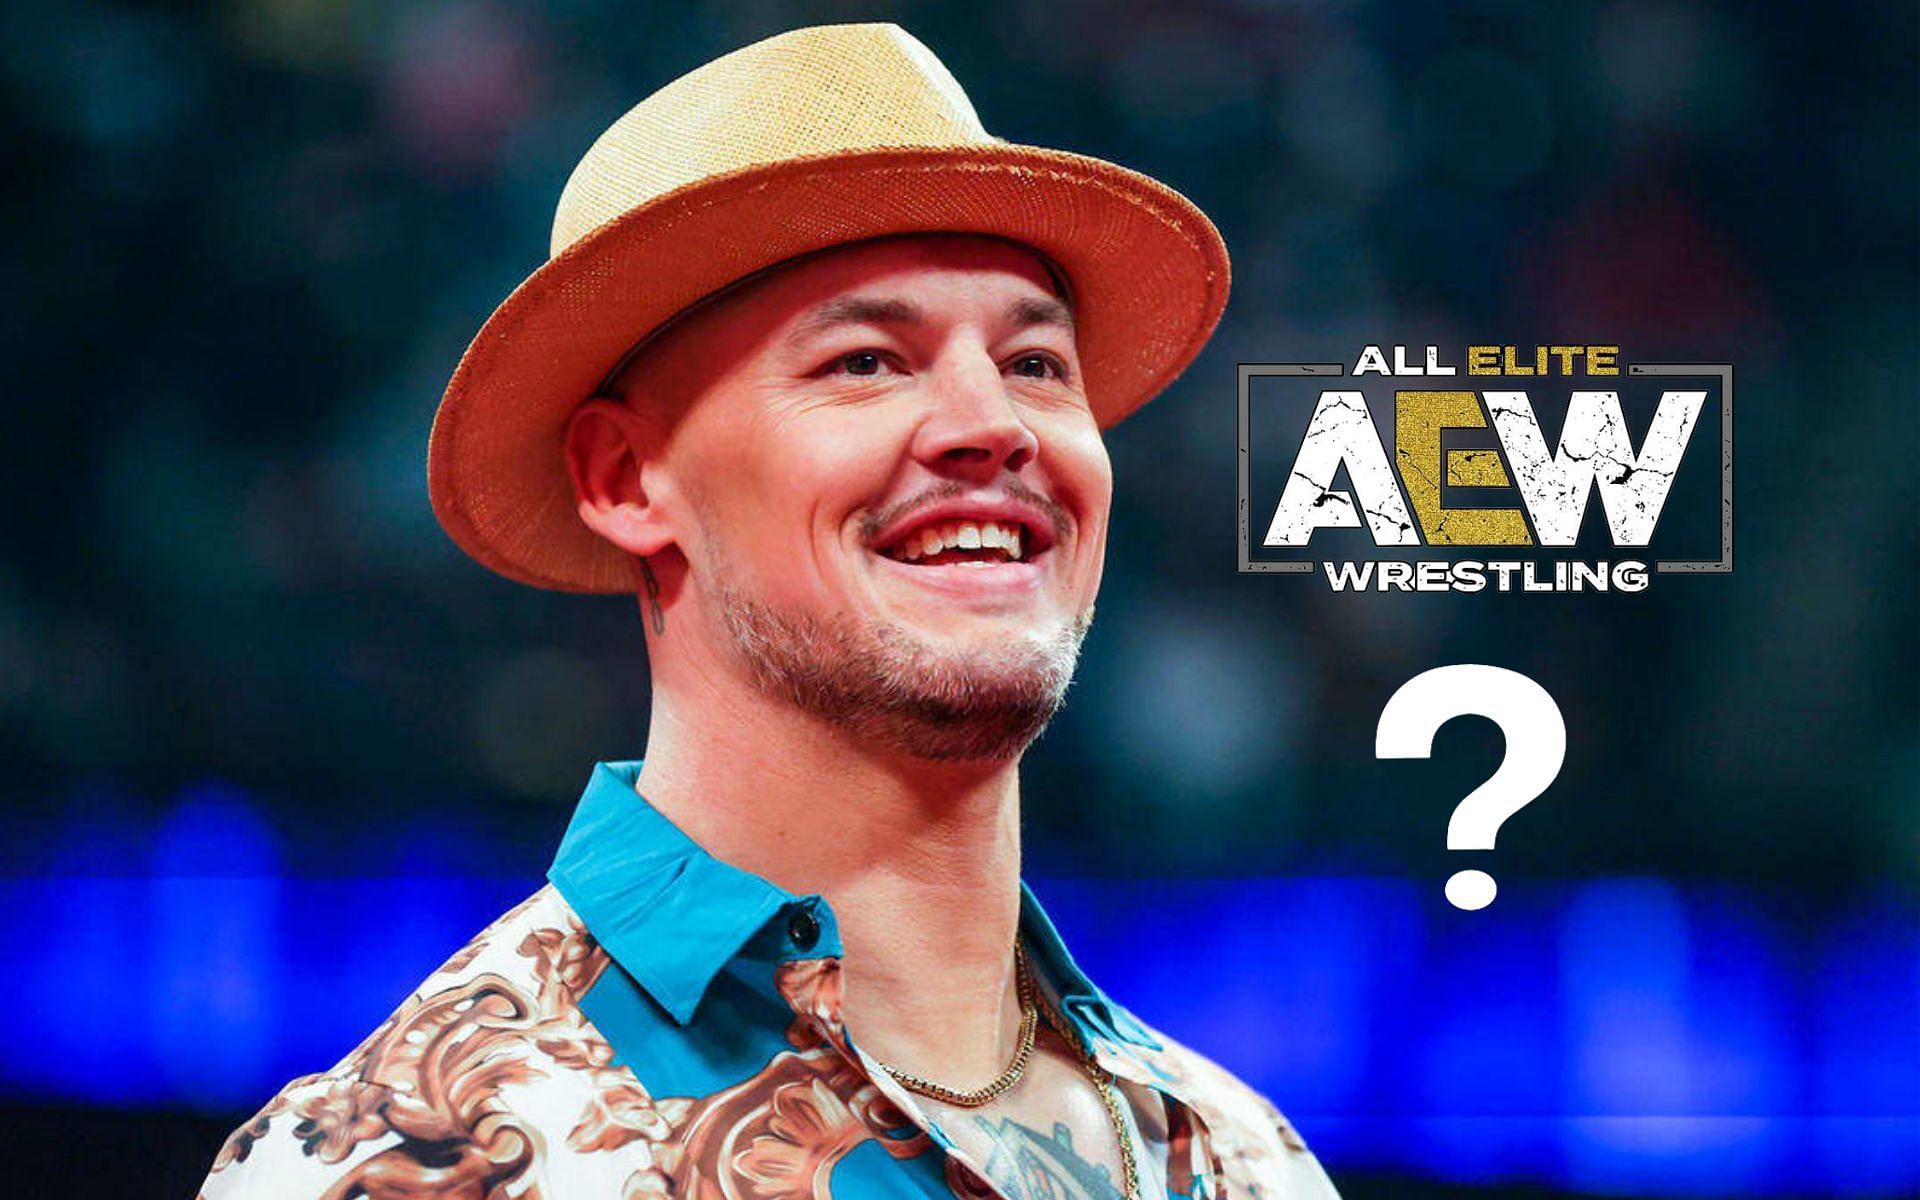 Current WWE Superstar Happy Corbin has a bond with this AEW star.